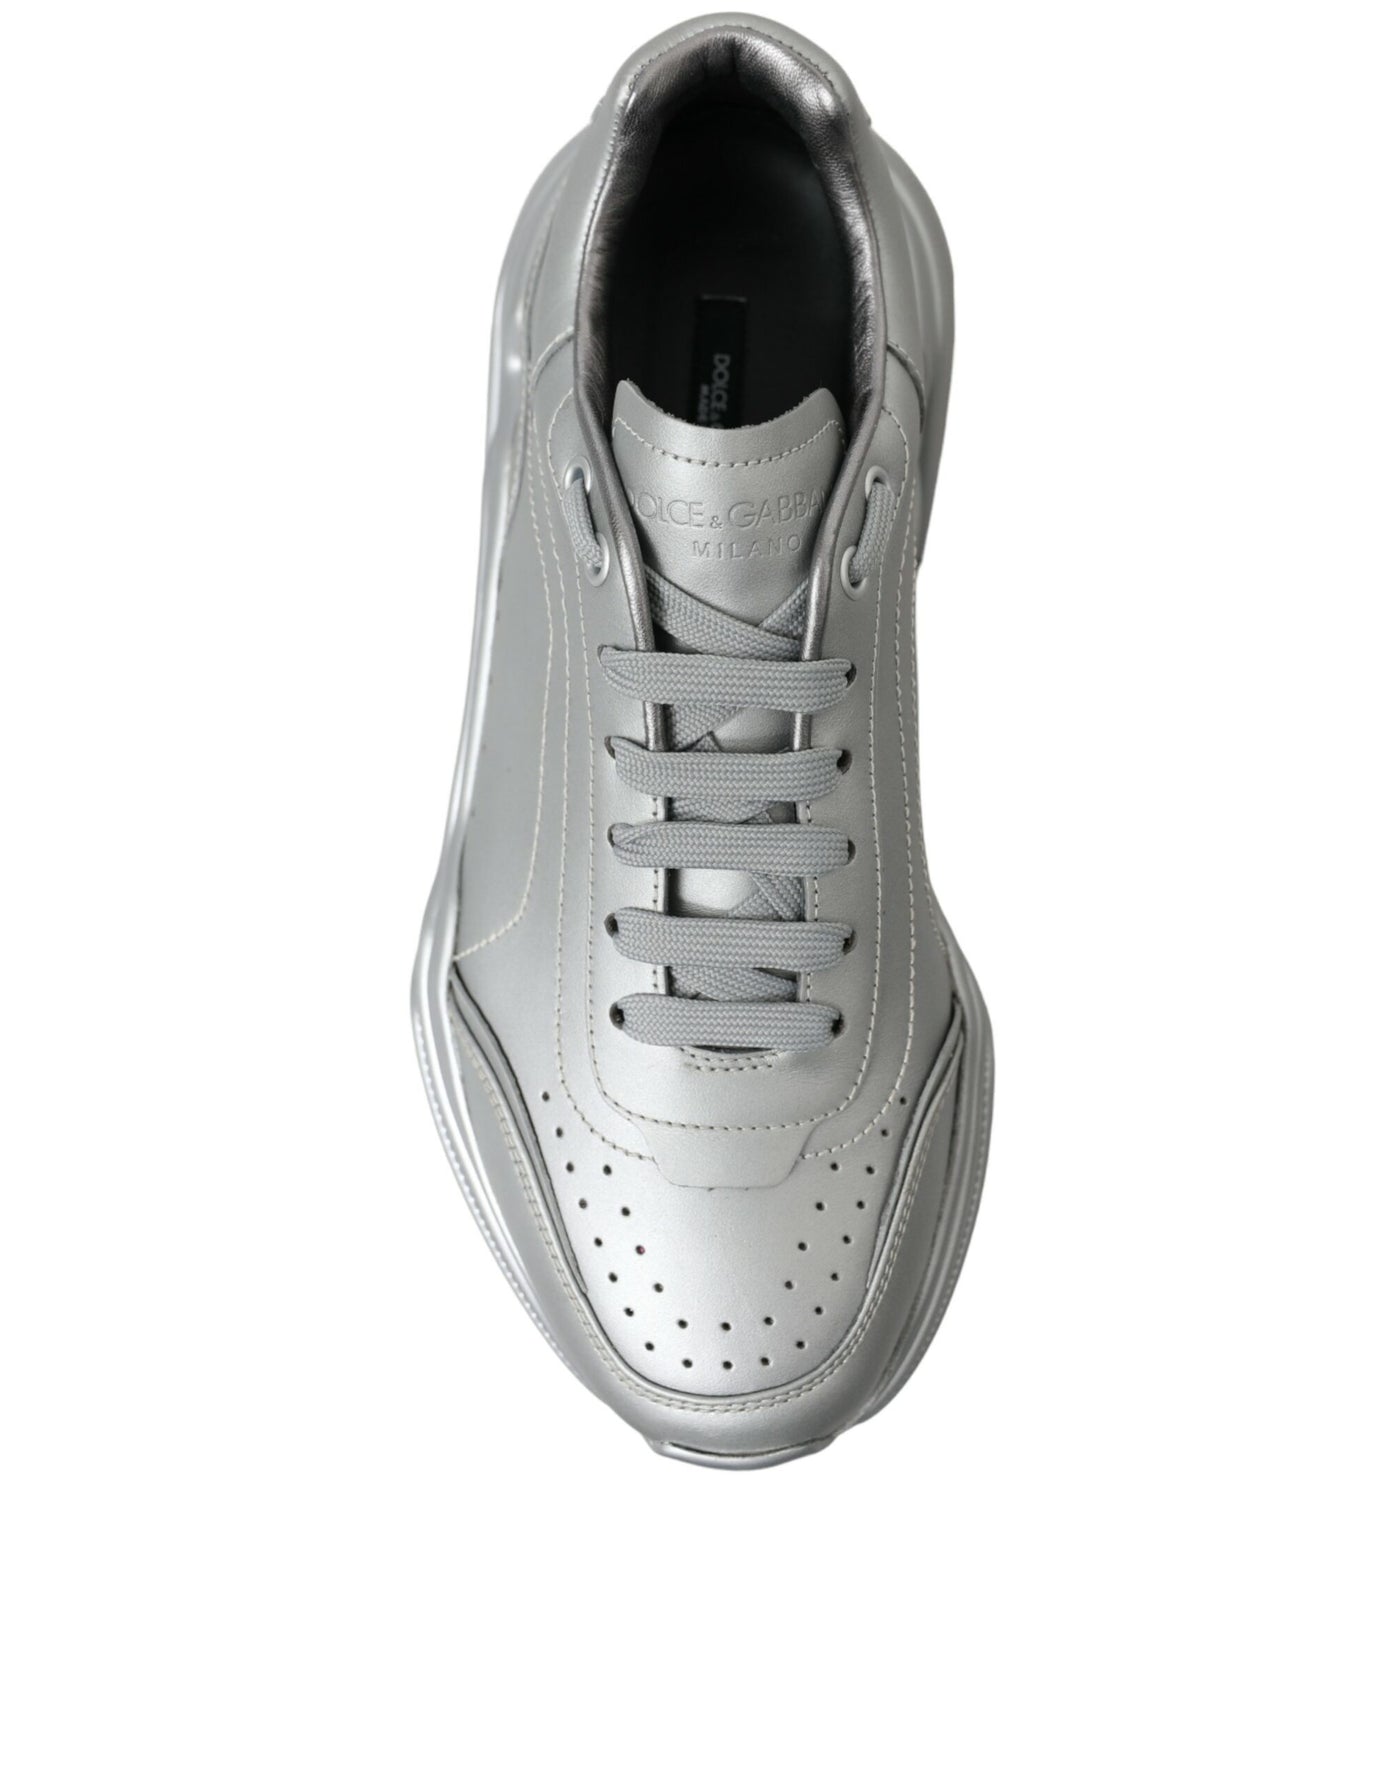 Dolce & Gabbana Silver DAYMASTER Leather Men Casual Sneakers Shoes